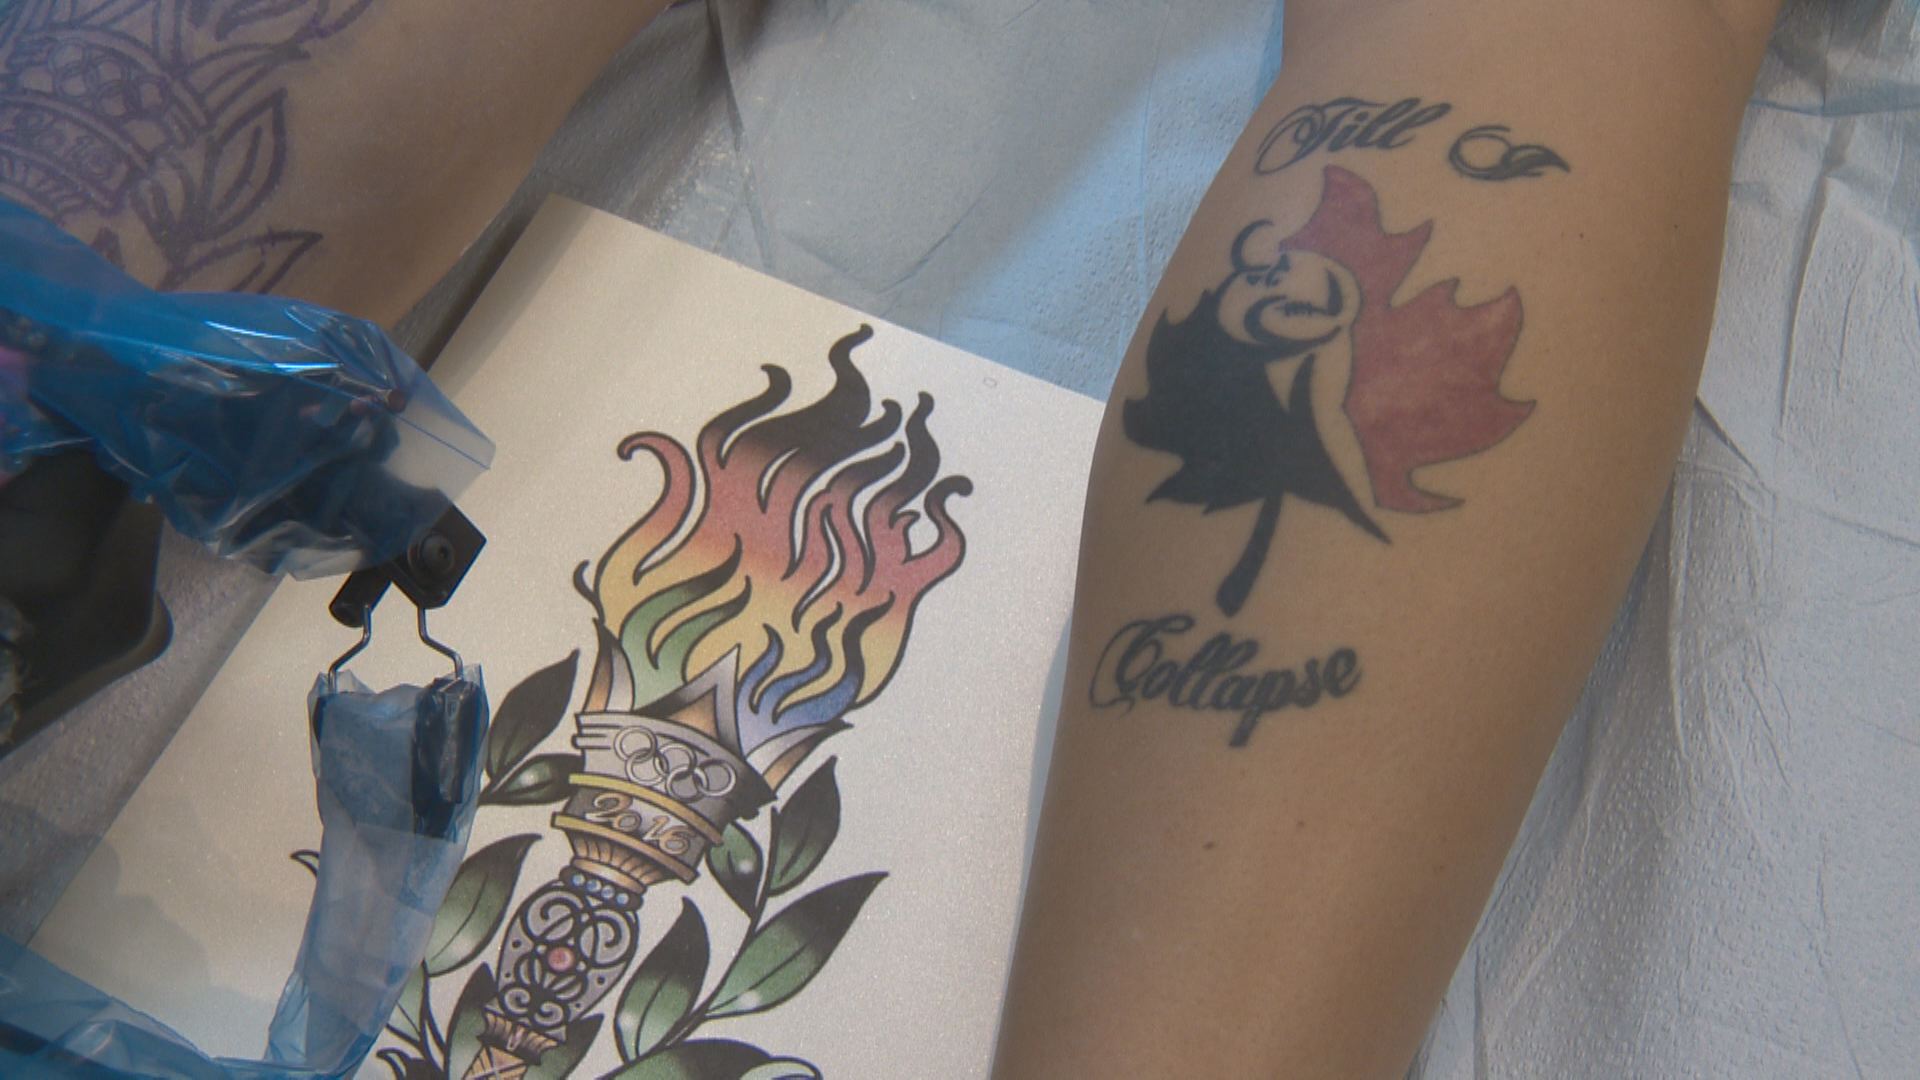 Ink me up': Iran tattoo artists aim to leave mark